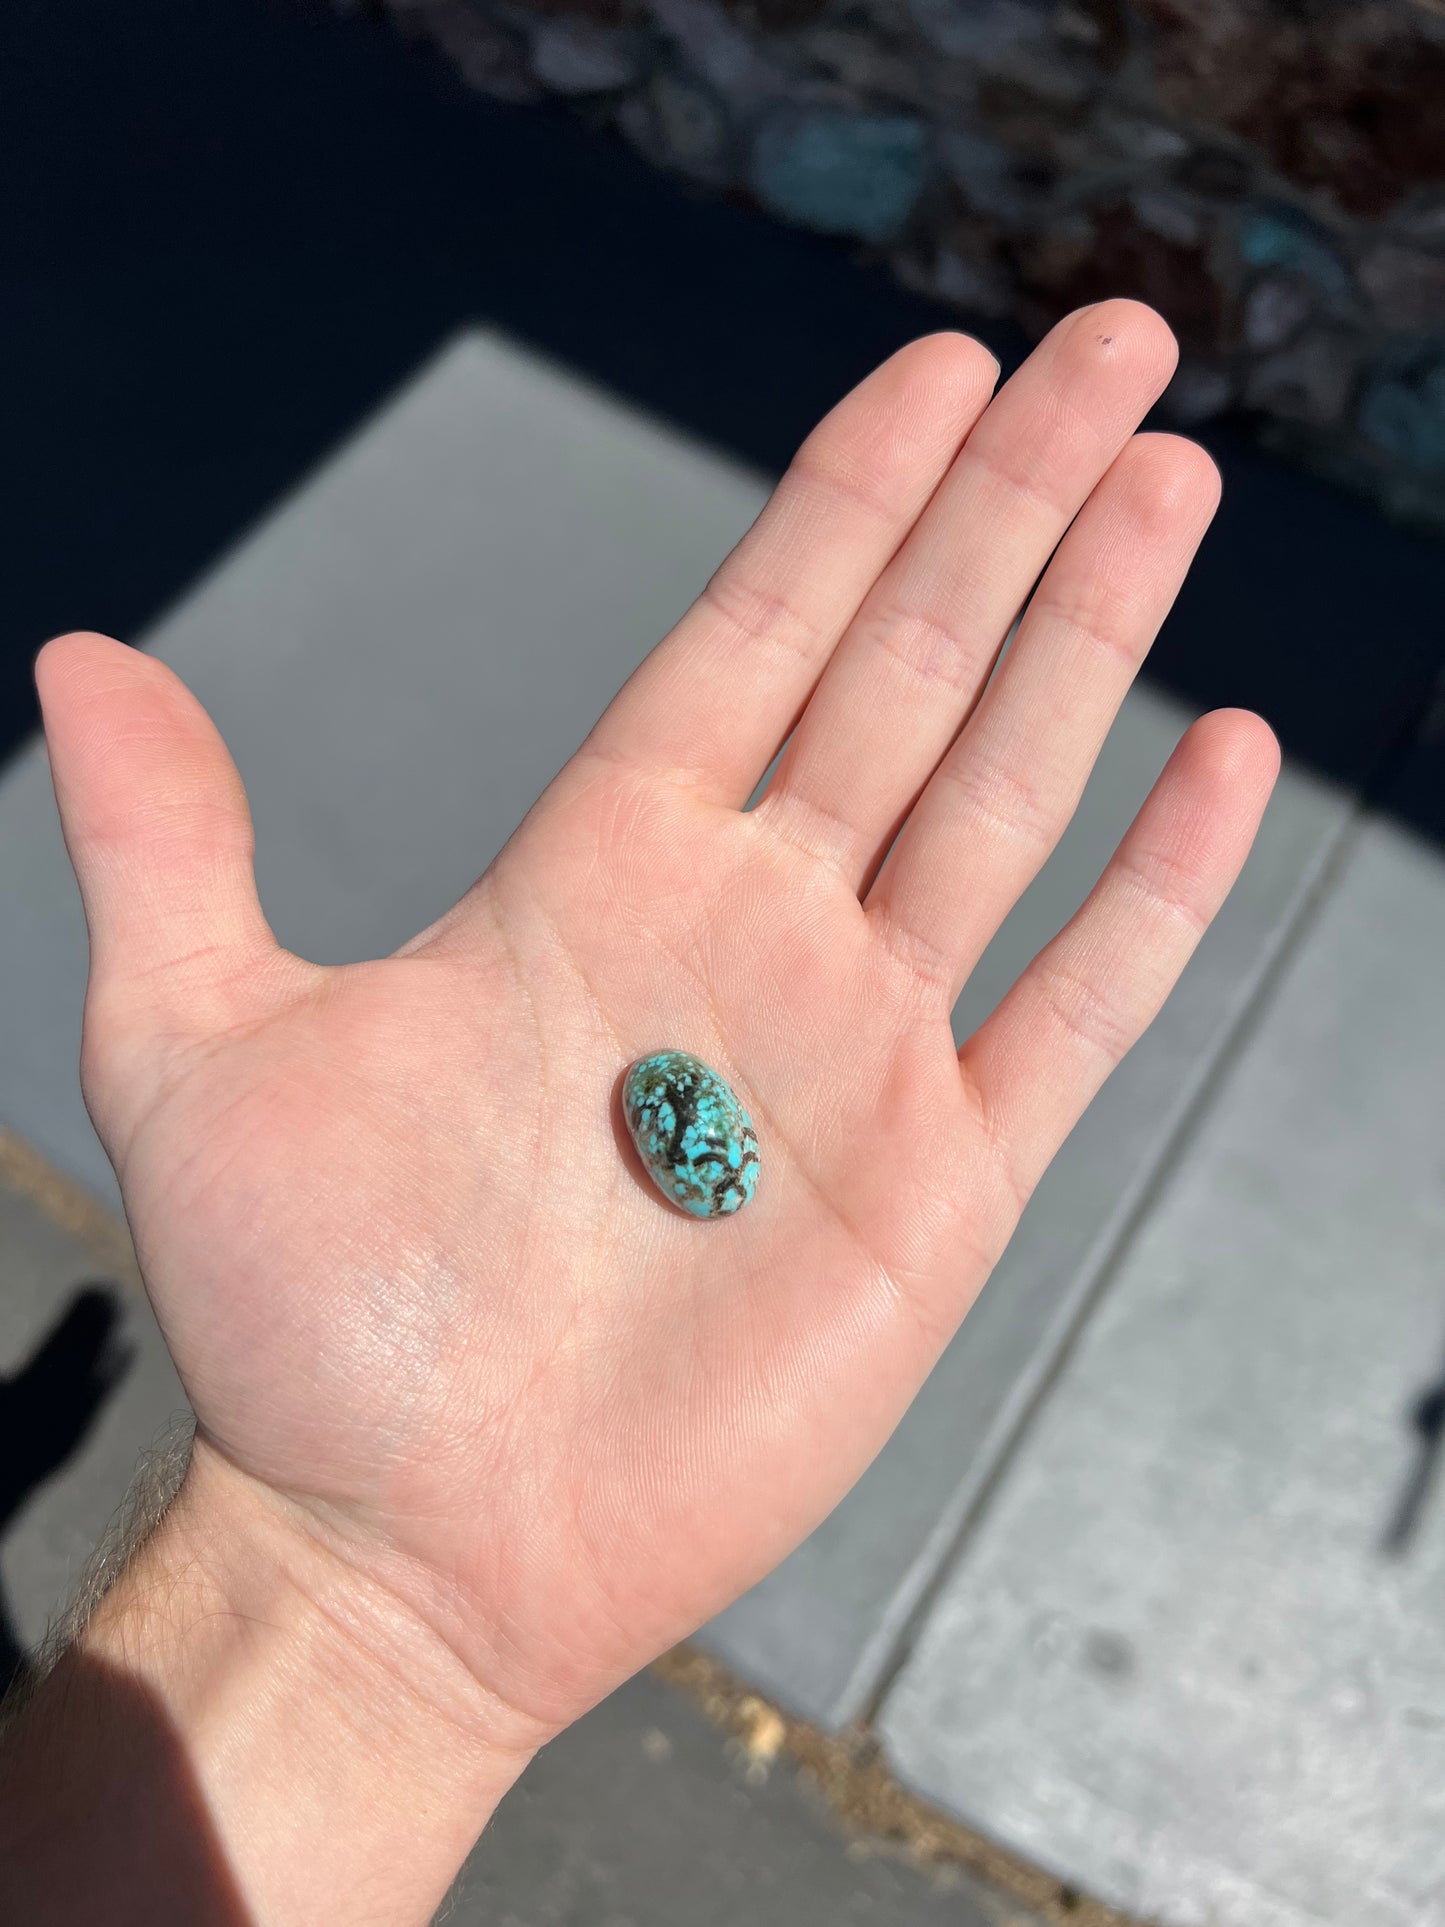 A loose, oval cabochon cut turquoise stone from Valley Blue Mine in Lander County, Nevada.